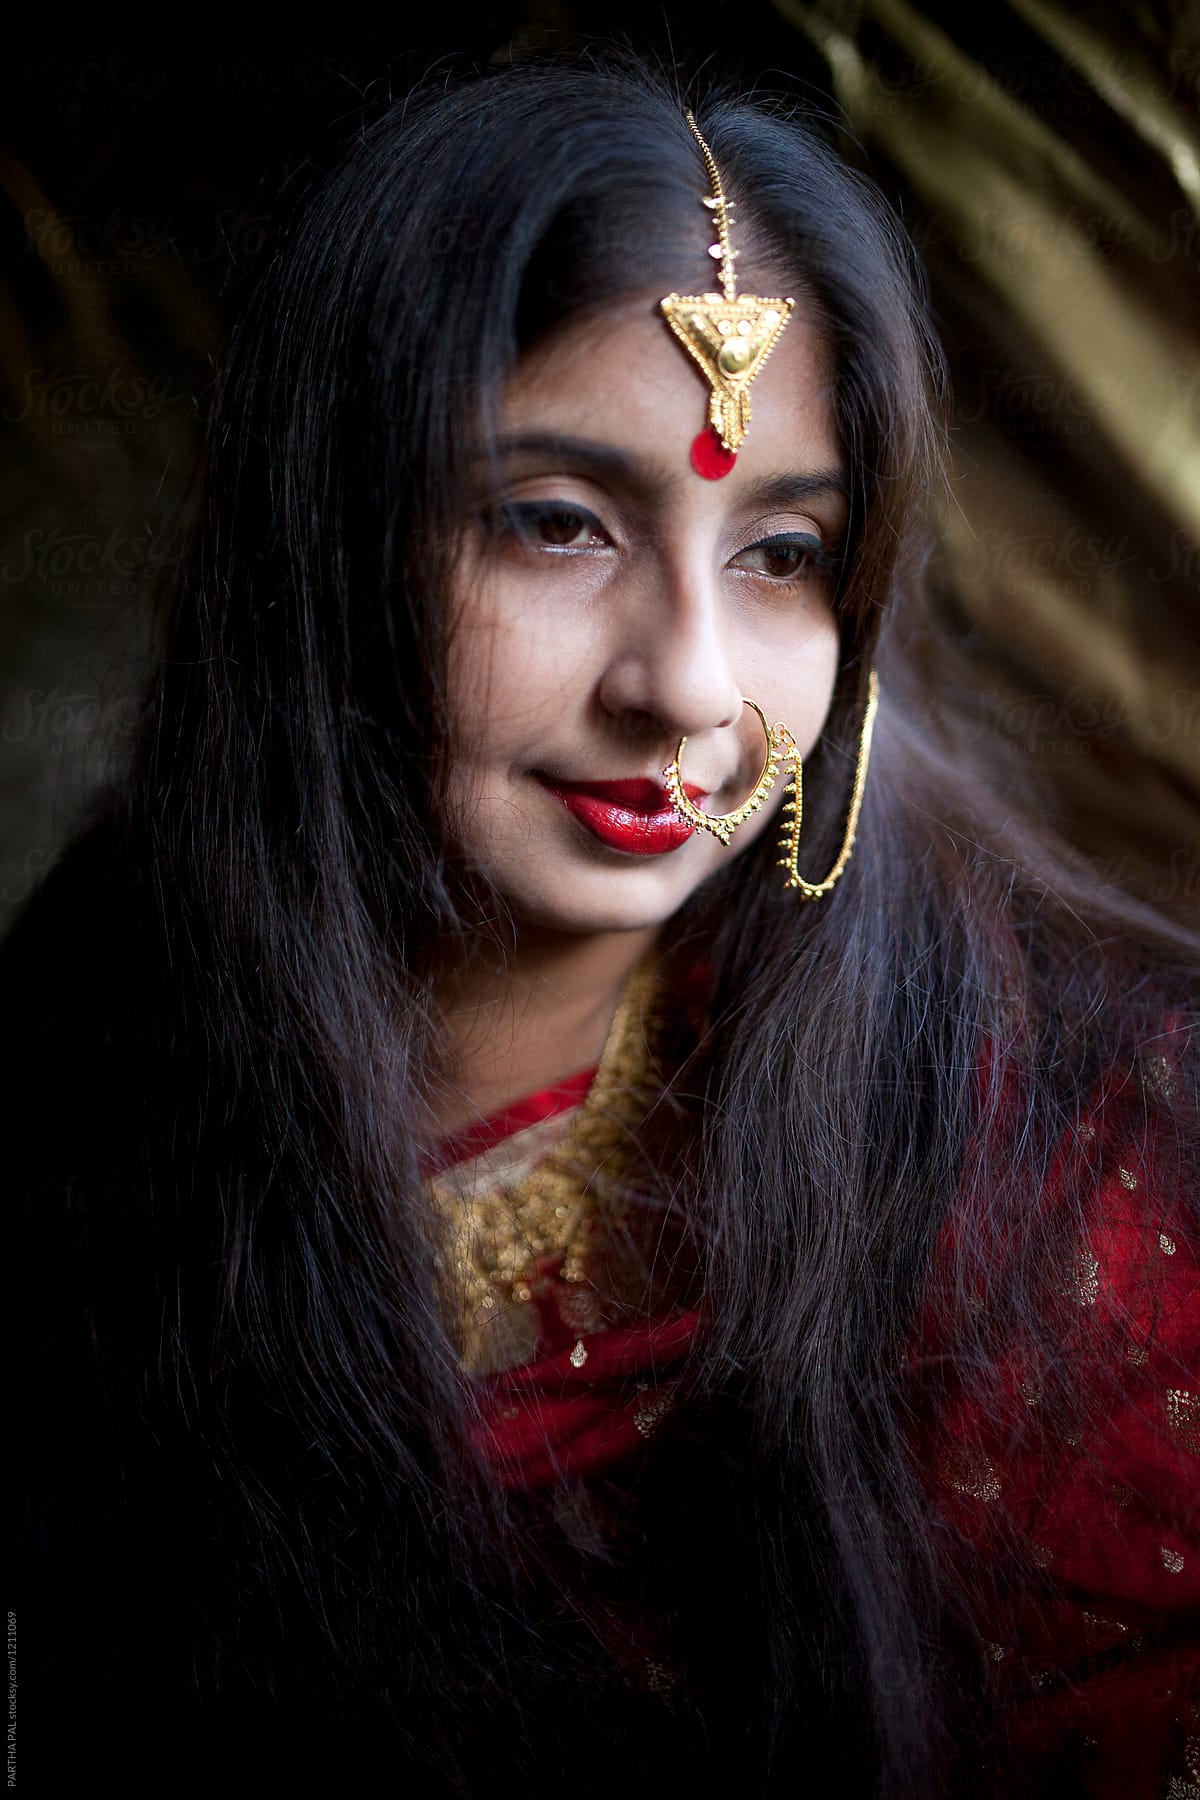 Young Indian woman with decorative Jewellery